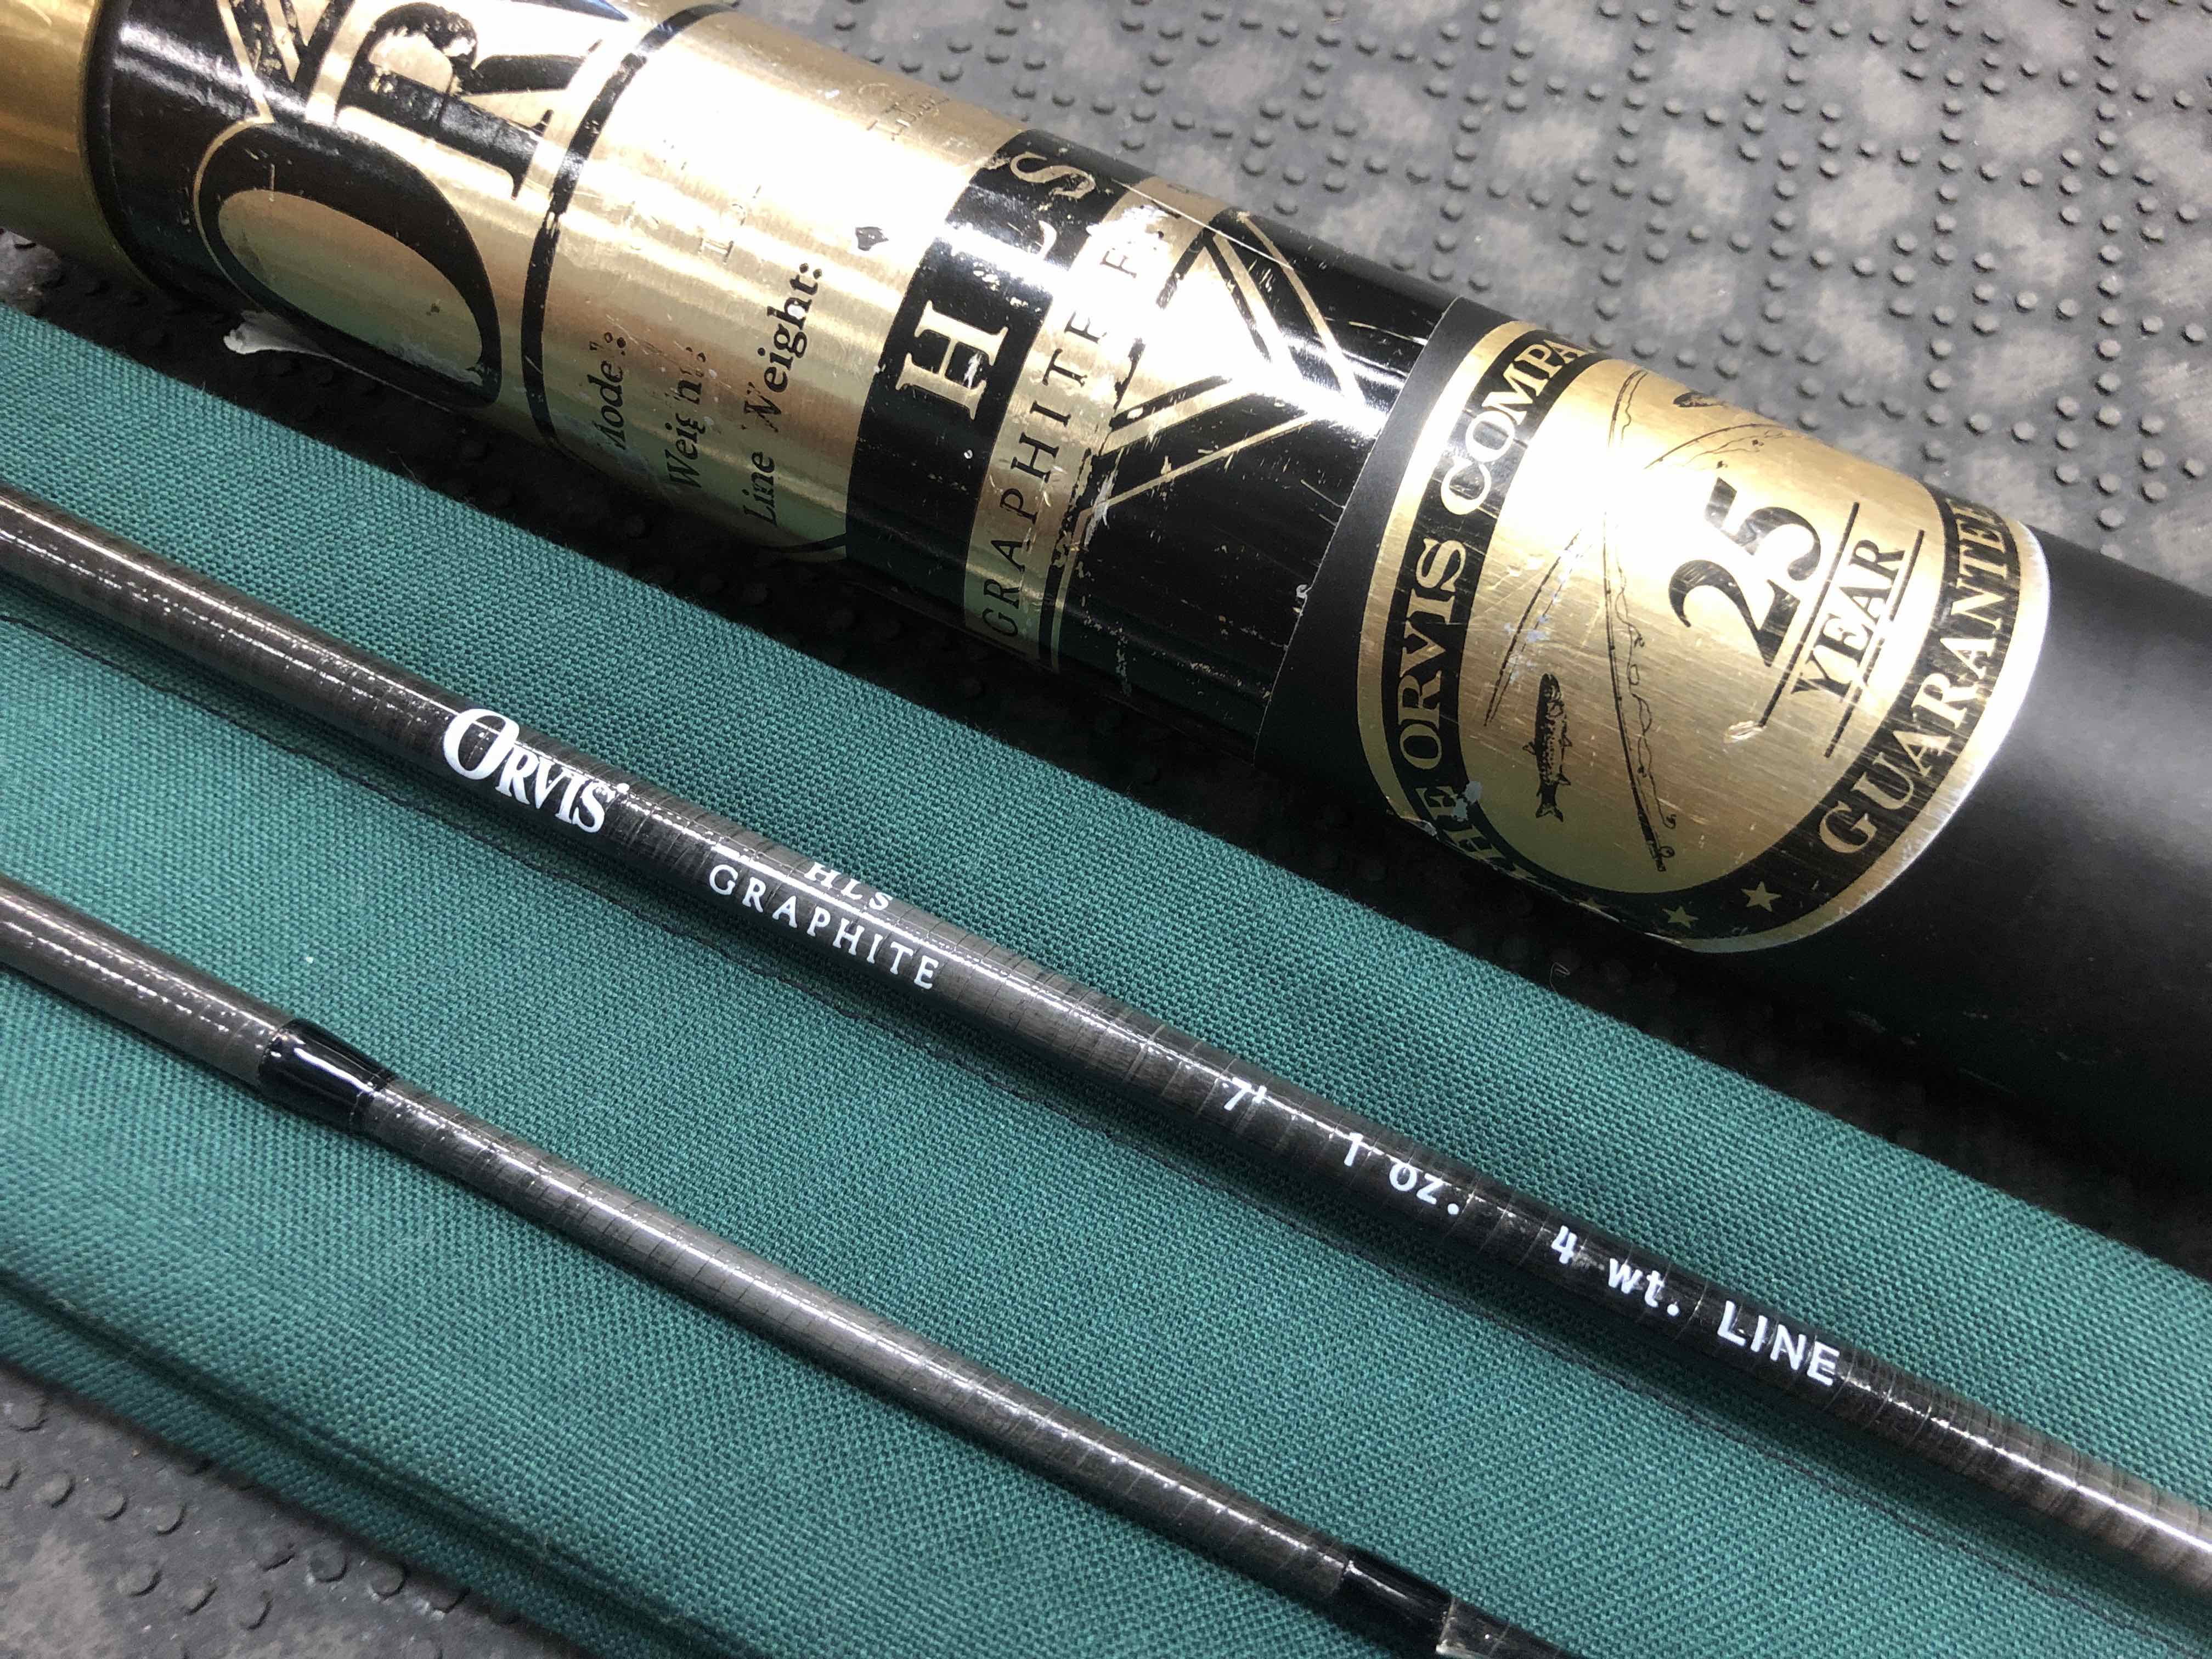 https://thefirstcast.ca/wp-content/uploads/2019/06/Orvis-Superfine-HLS-Graphite-7foot-2piece-4weight-1oz-Fly-Rod-AA.jpg